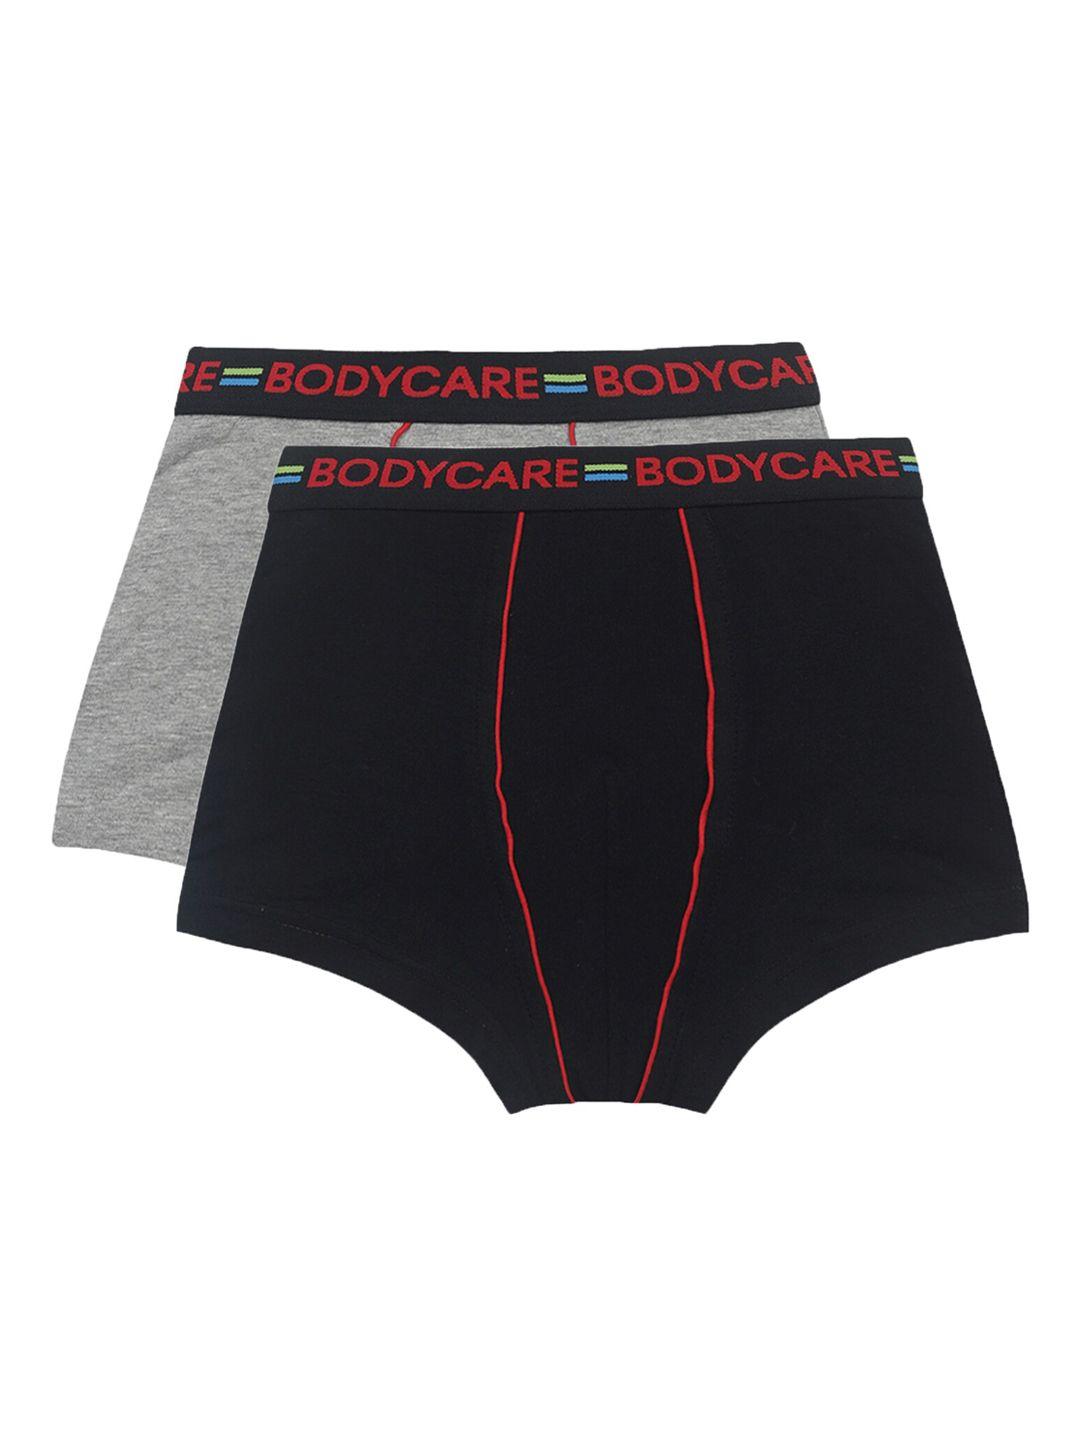 bodycare-kids-boys-pack-of-2-assorted-cotton-trunks-kga2053a-60